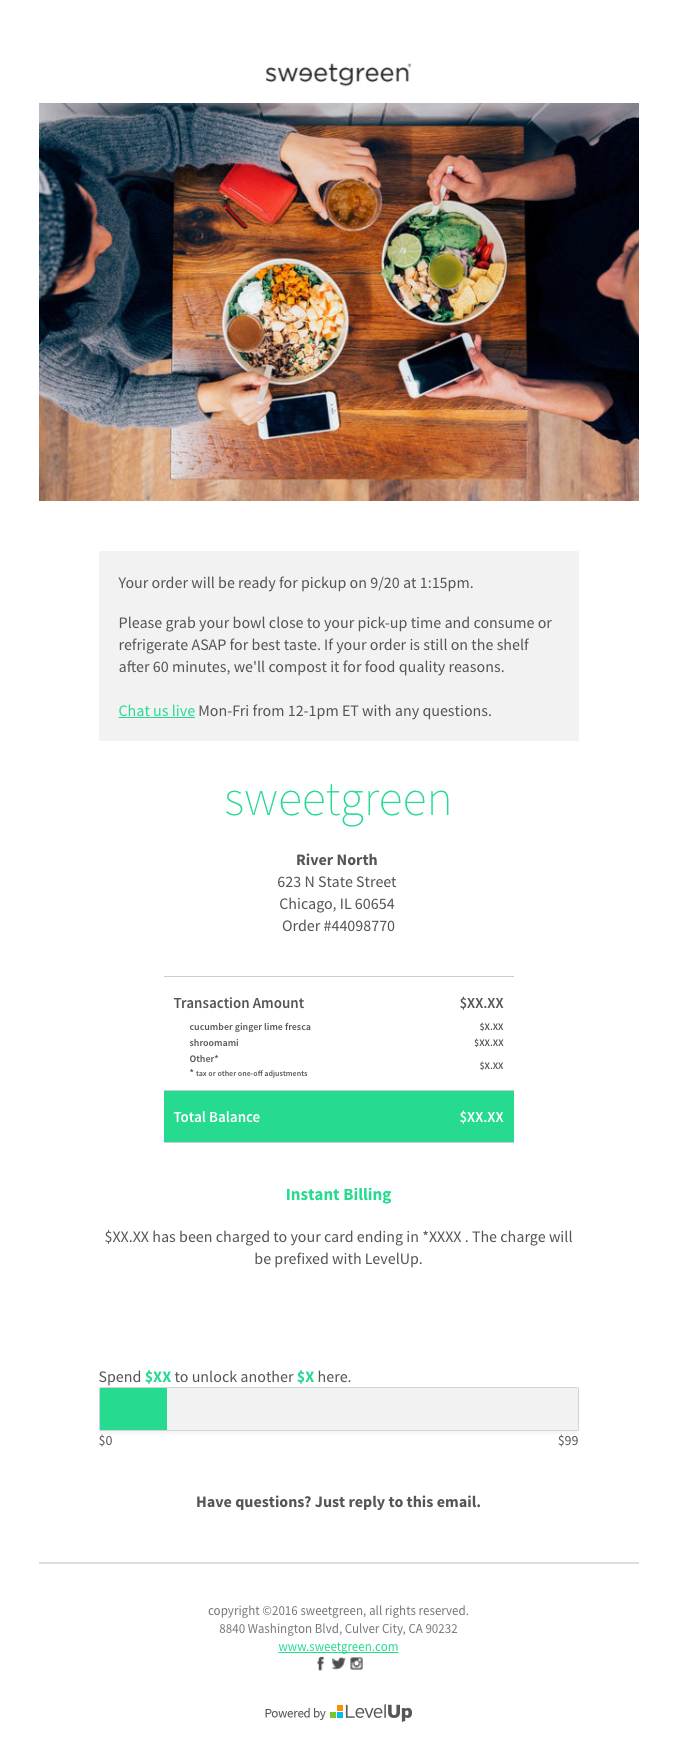 Thanks for visiting sweetgreen